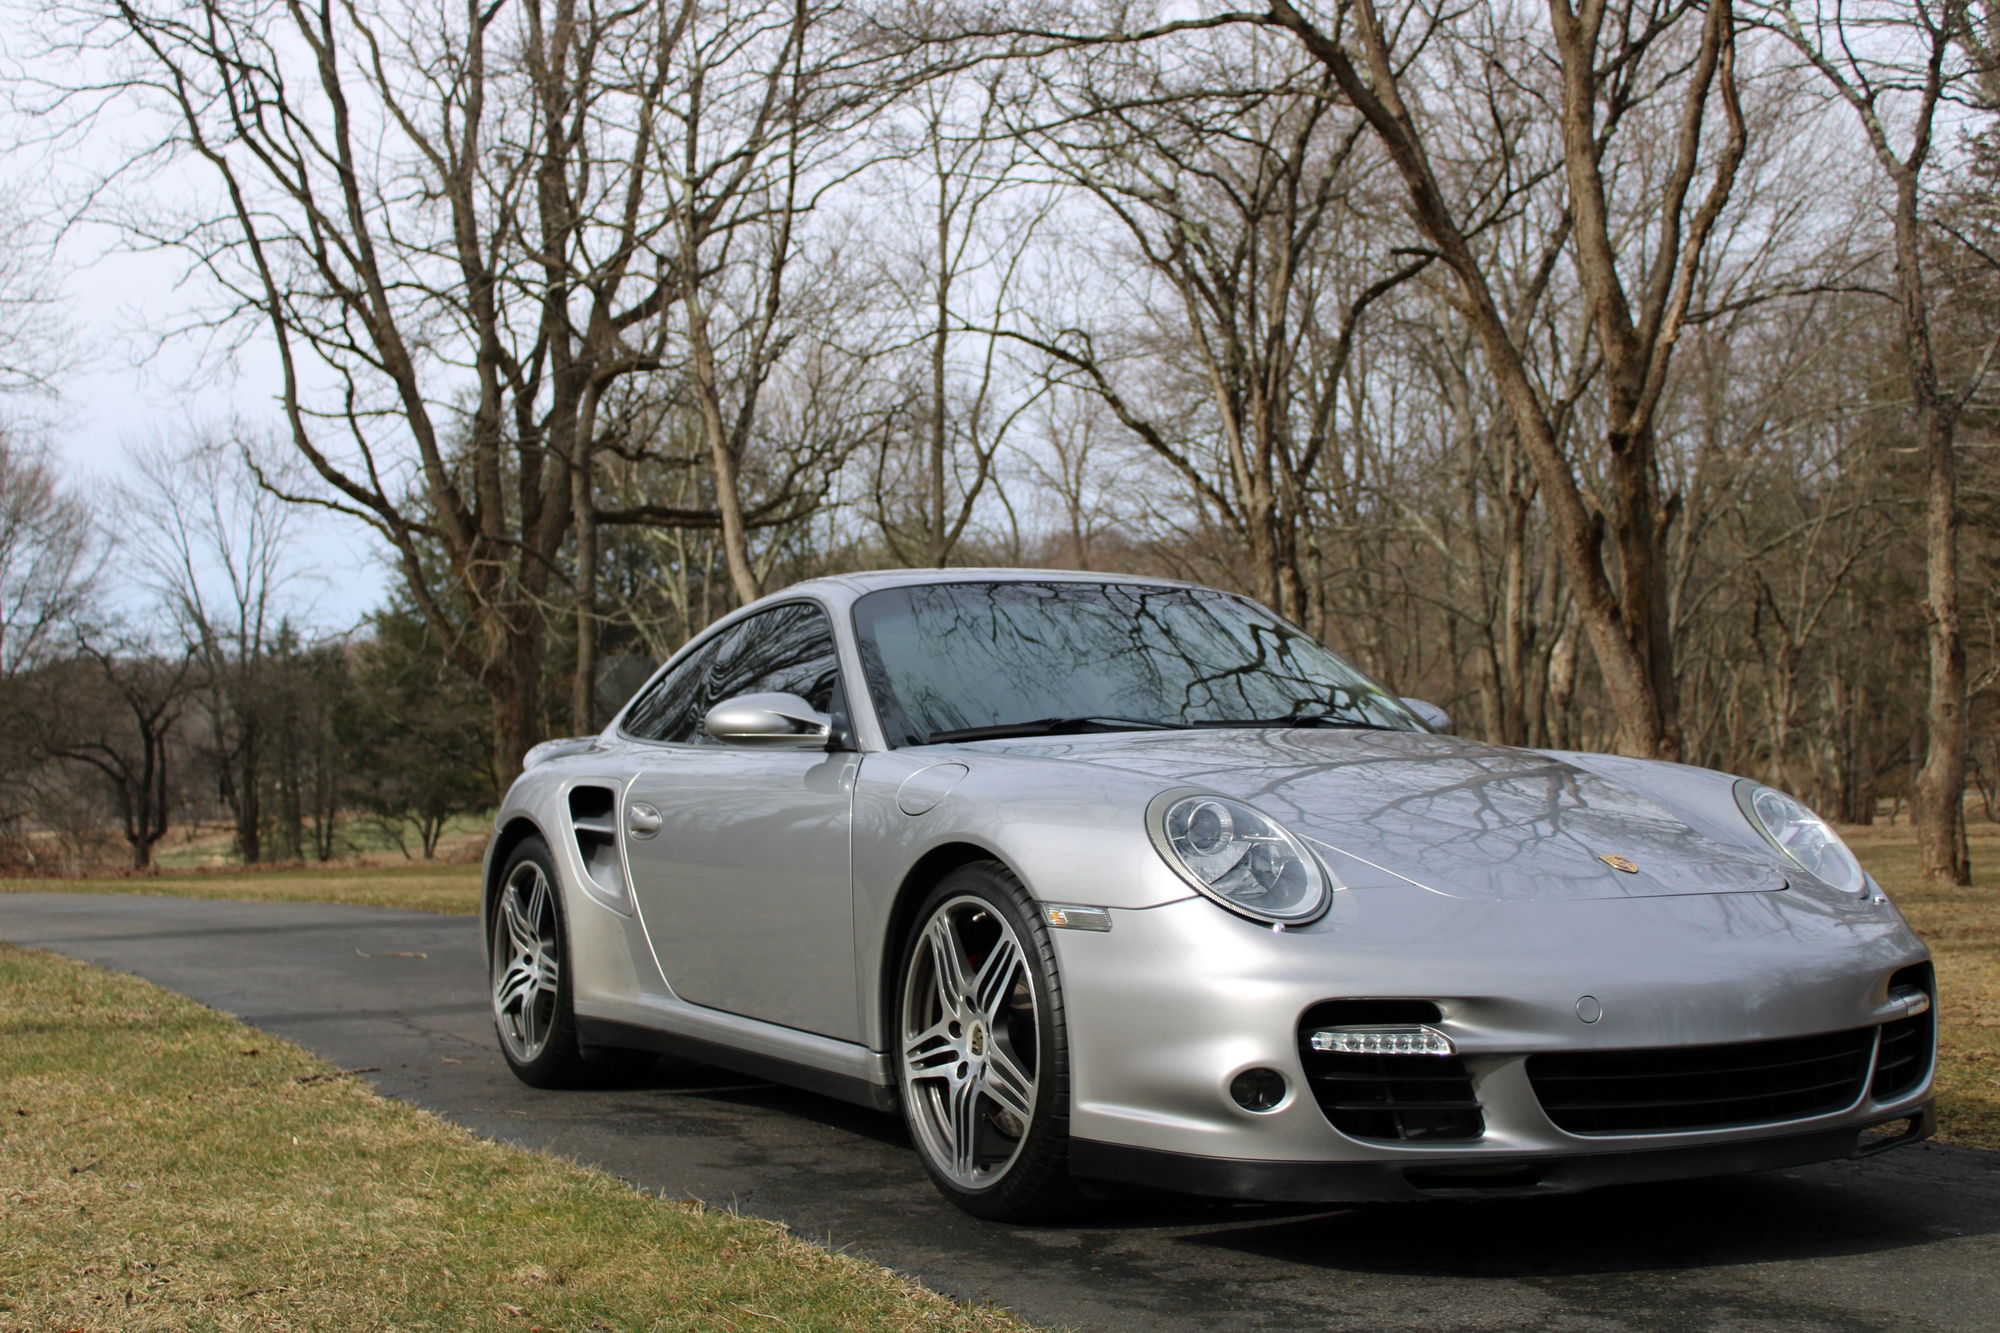 2008 Porsche 911 - 2008 Porsche 997.1 Turbo (6 Speed) GT silver w/ Cocoa brown, 32.8k Miles - Used - VIN wp0ad29938s783501 - 32,800 Miles - 6 cyl - 4WD - Manual - Coupe - Silver - Saint James, NY 11780, United States